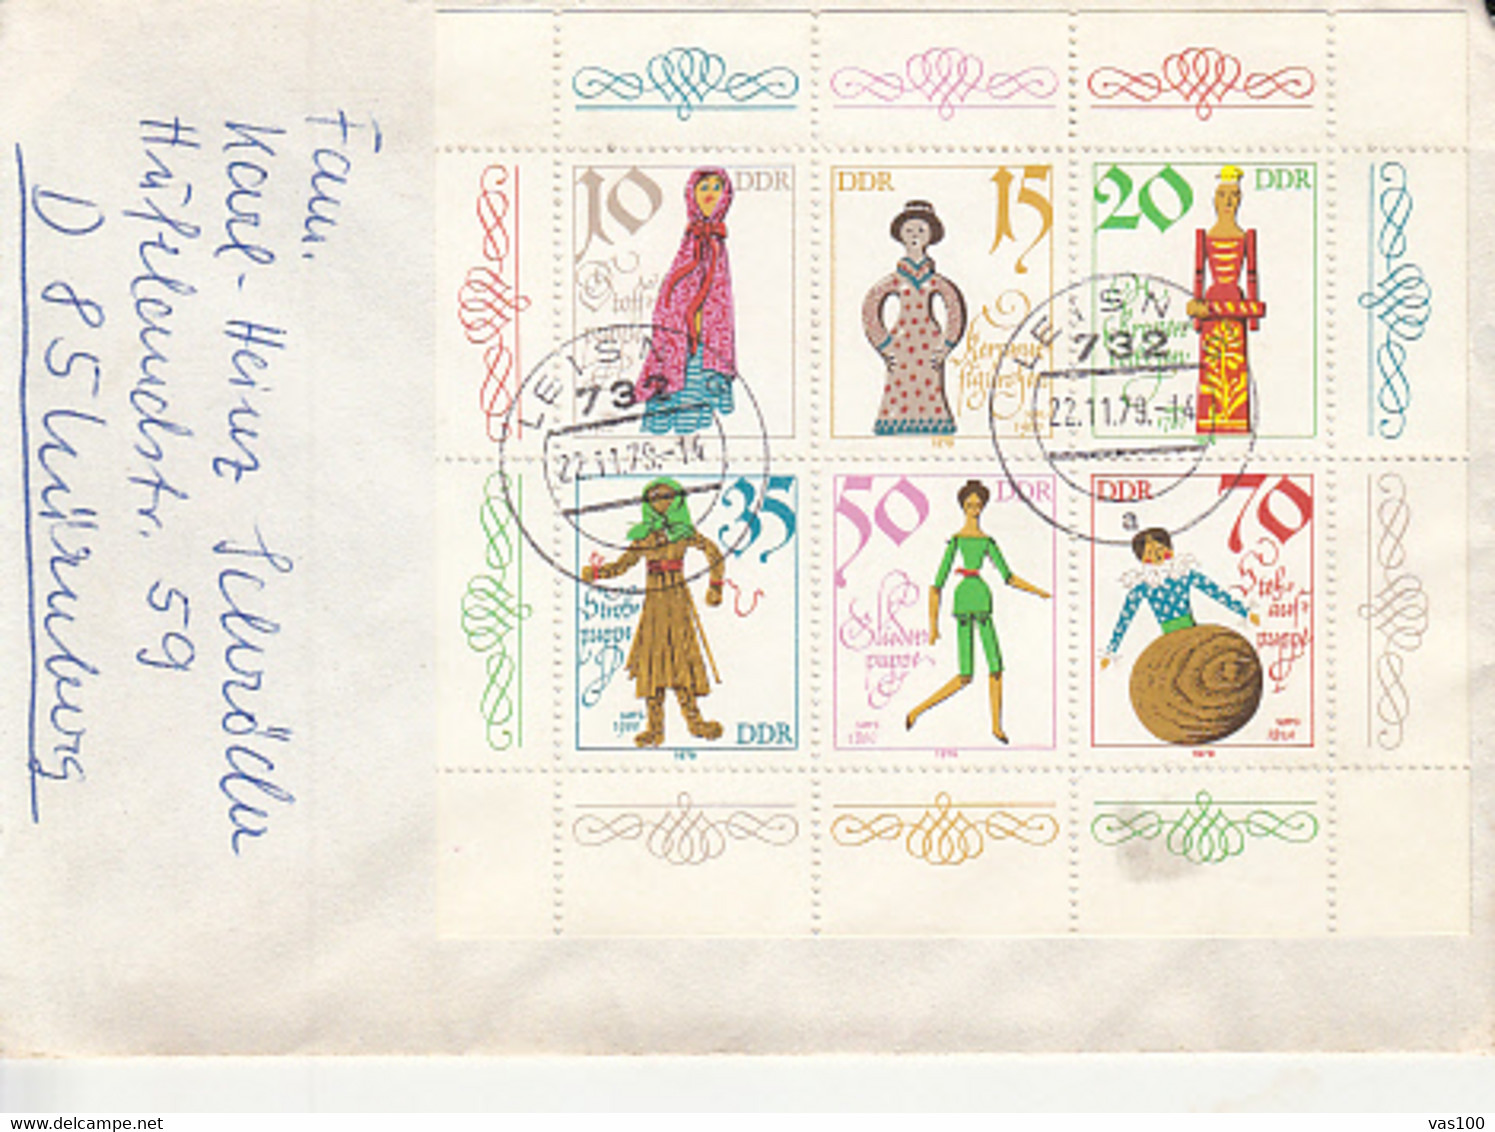 CHILDRENS, PUPPETS, STAMPS ON COVER, 1979, GERMANY - Marionetten